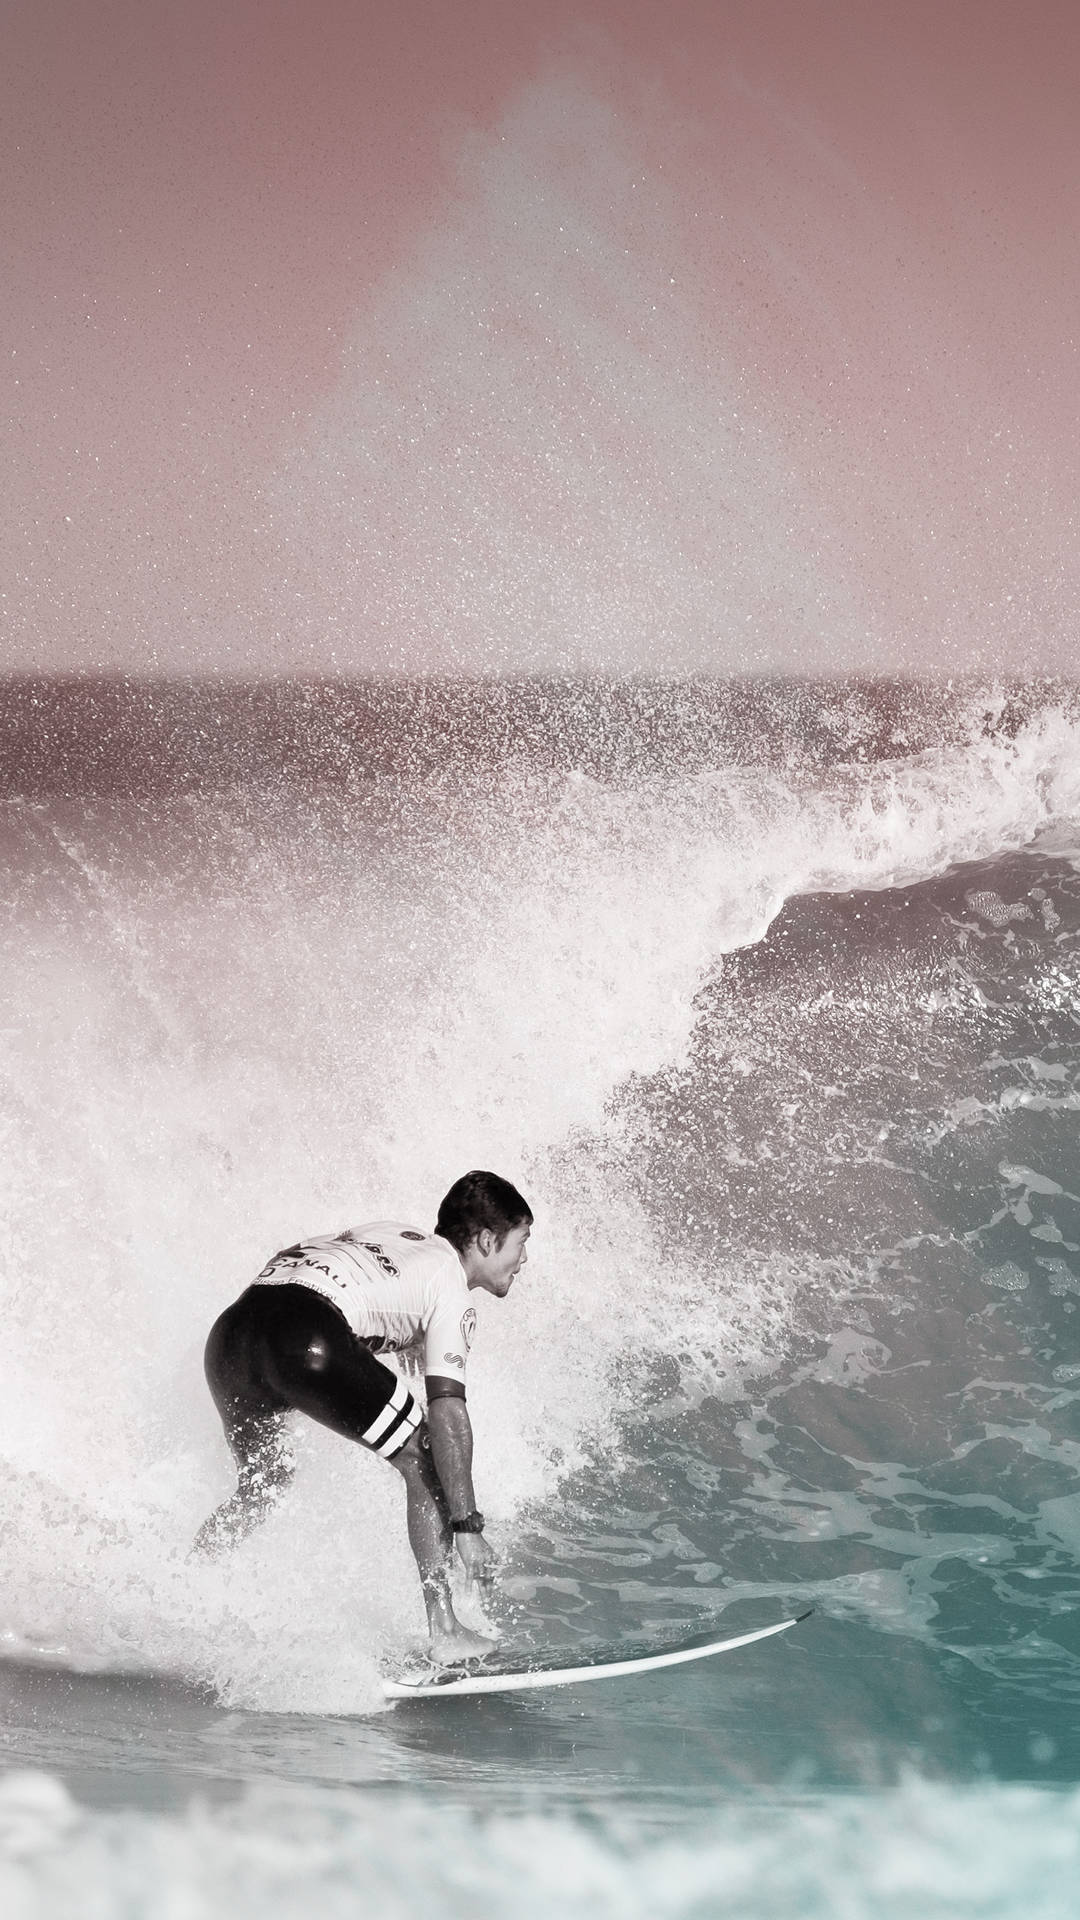 Surfing Muted Hues Filter Background